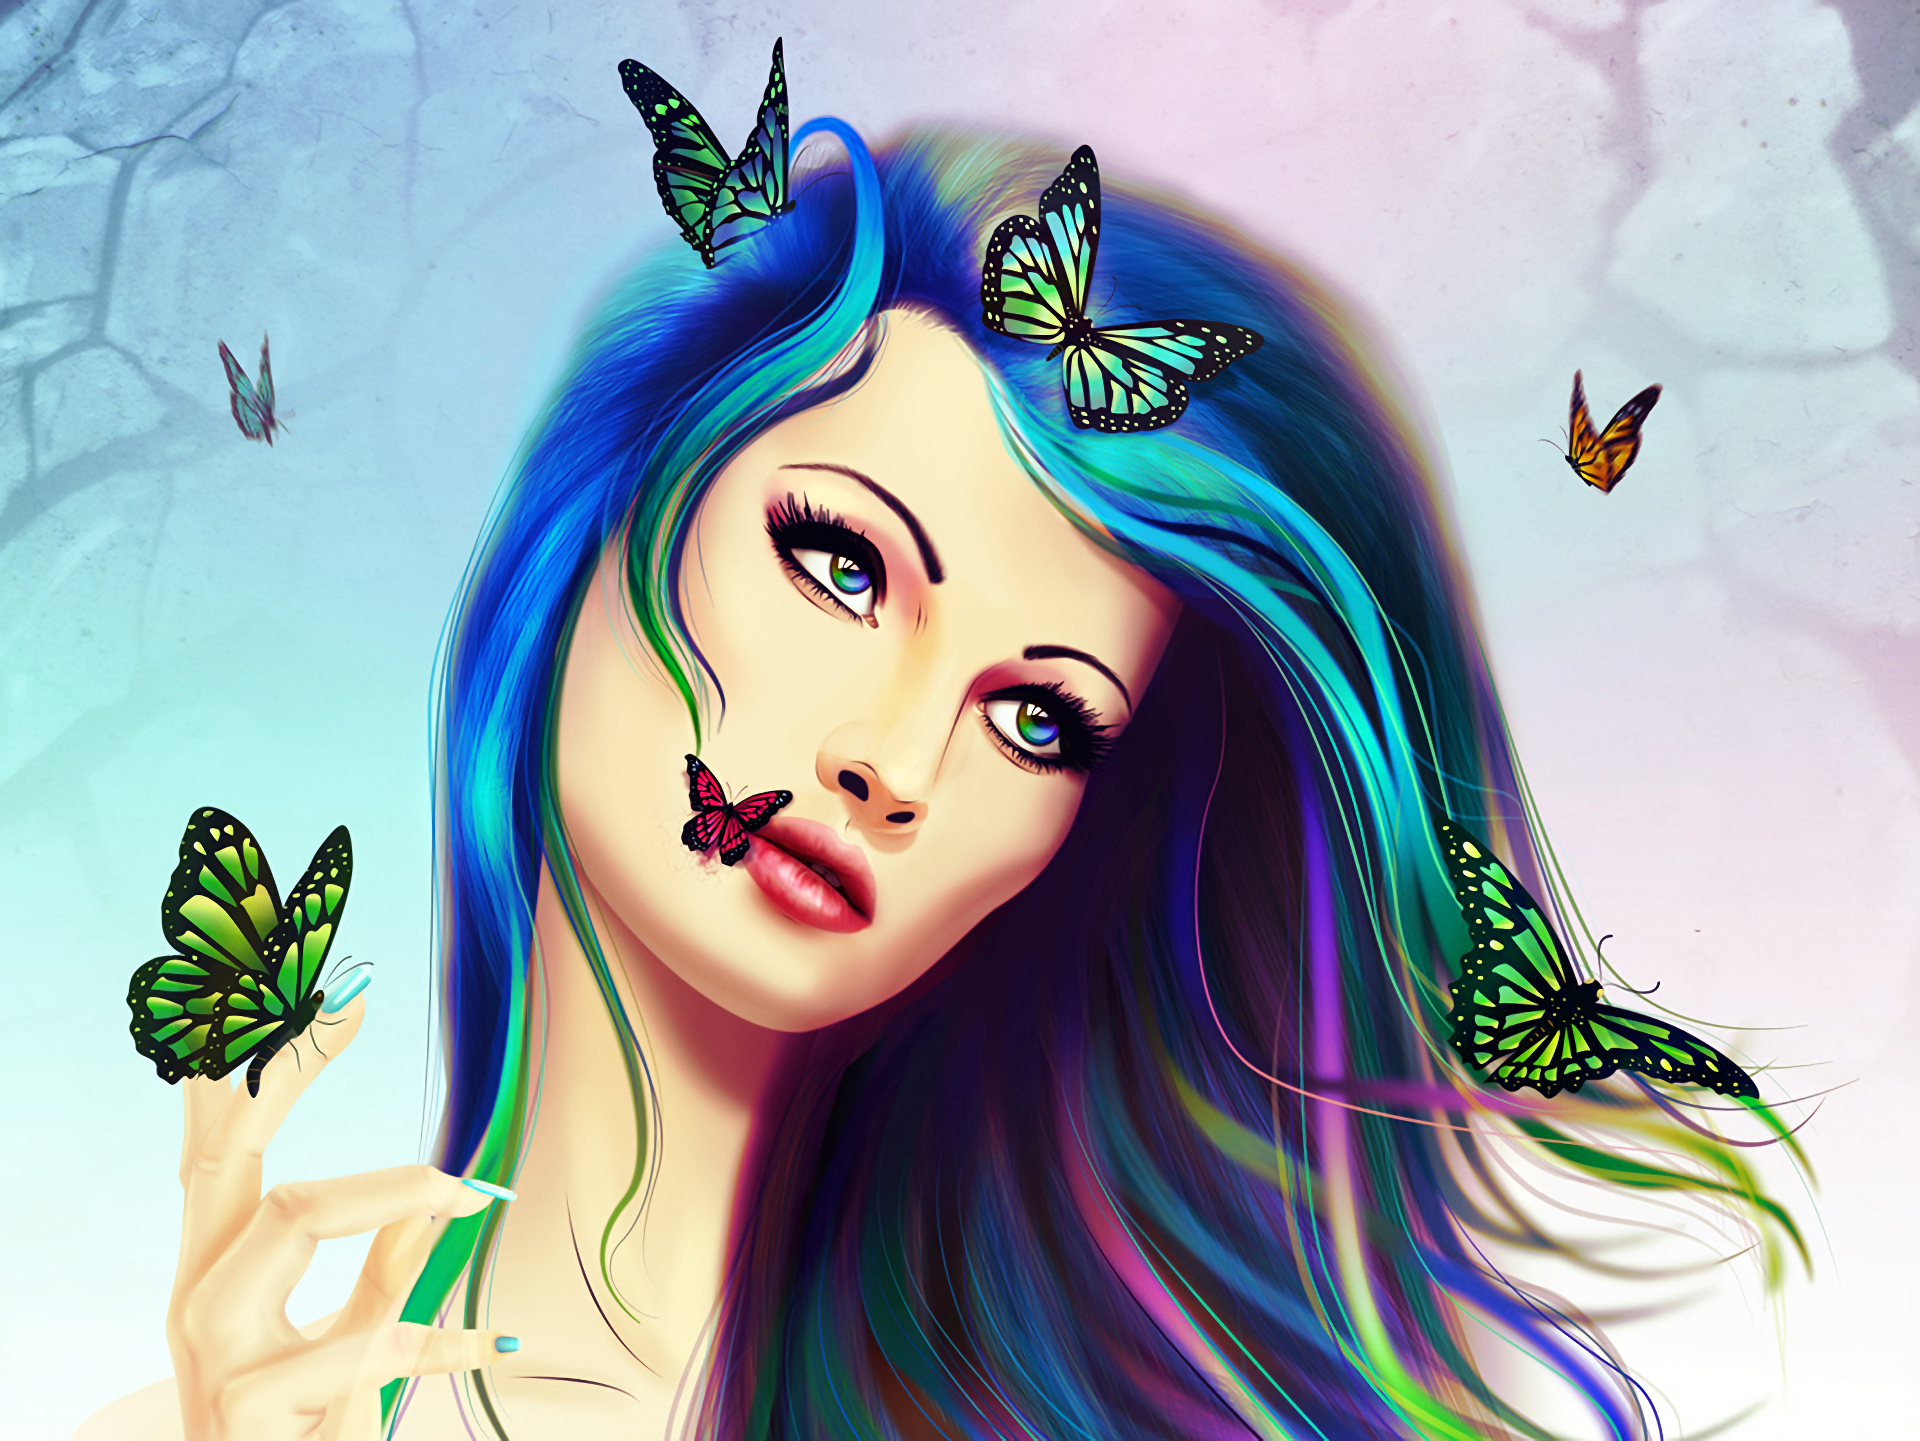 Fantasy Girl and Butterflies